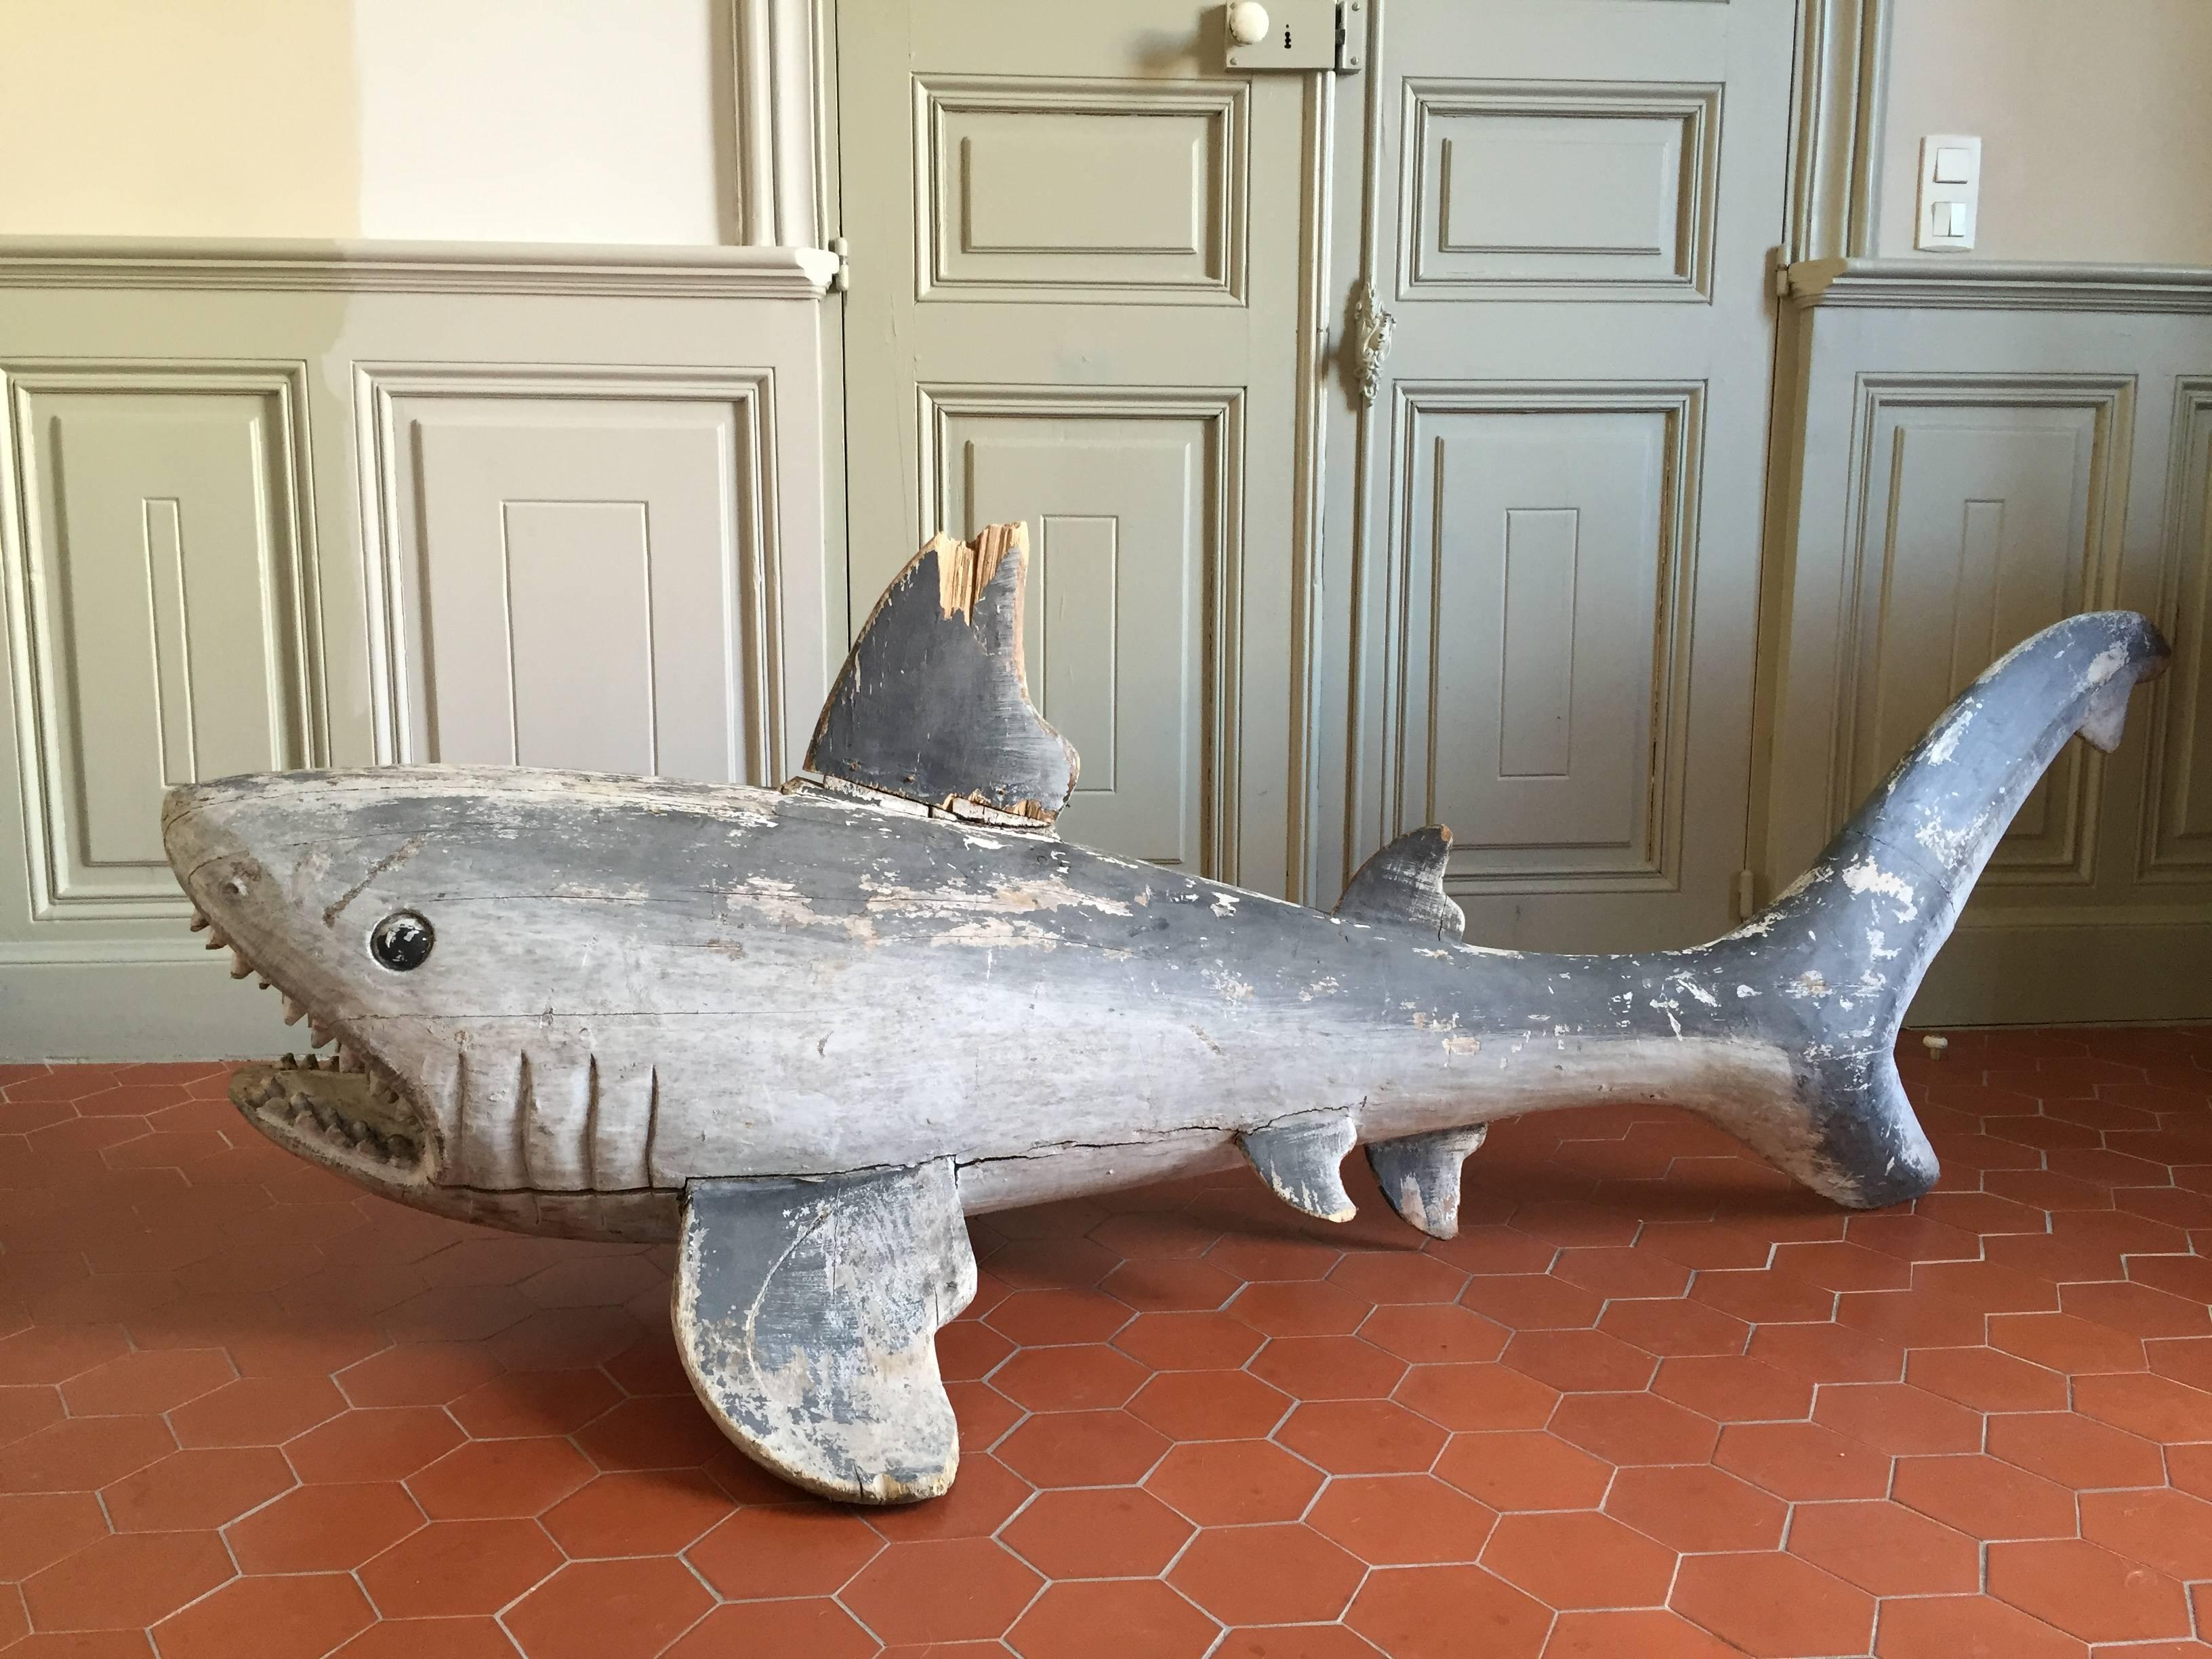 Unique and impressive shark sculpture in massive wood.
Nice blue grey patina and realistic details.
Manufactured by a craftsman from the region of Bordeaux, France, circa 1920.